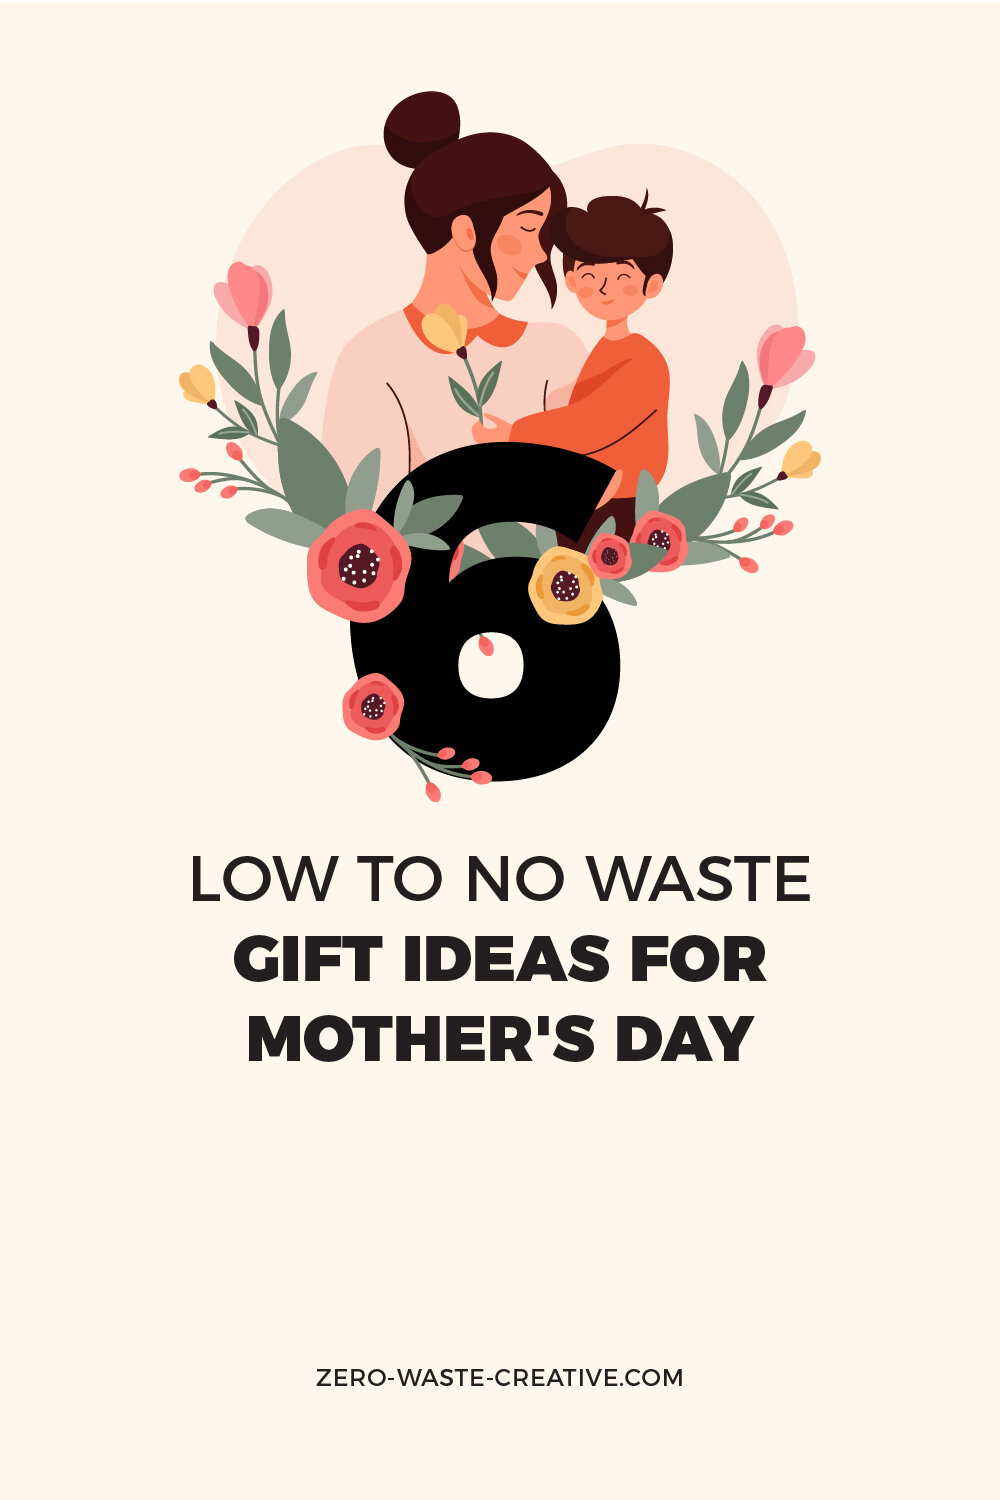 6 Low to No Waste Gift Ideas for Mother's Day.jpg